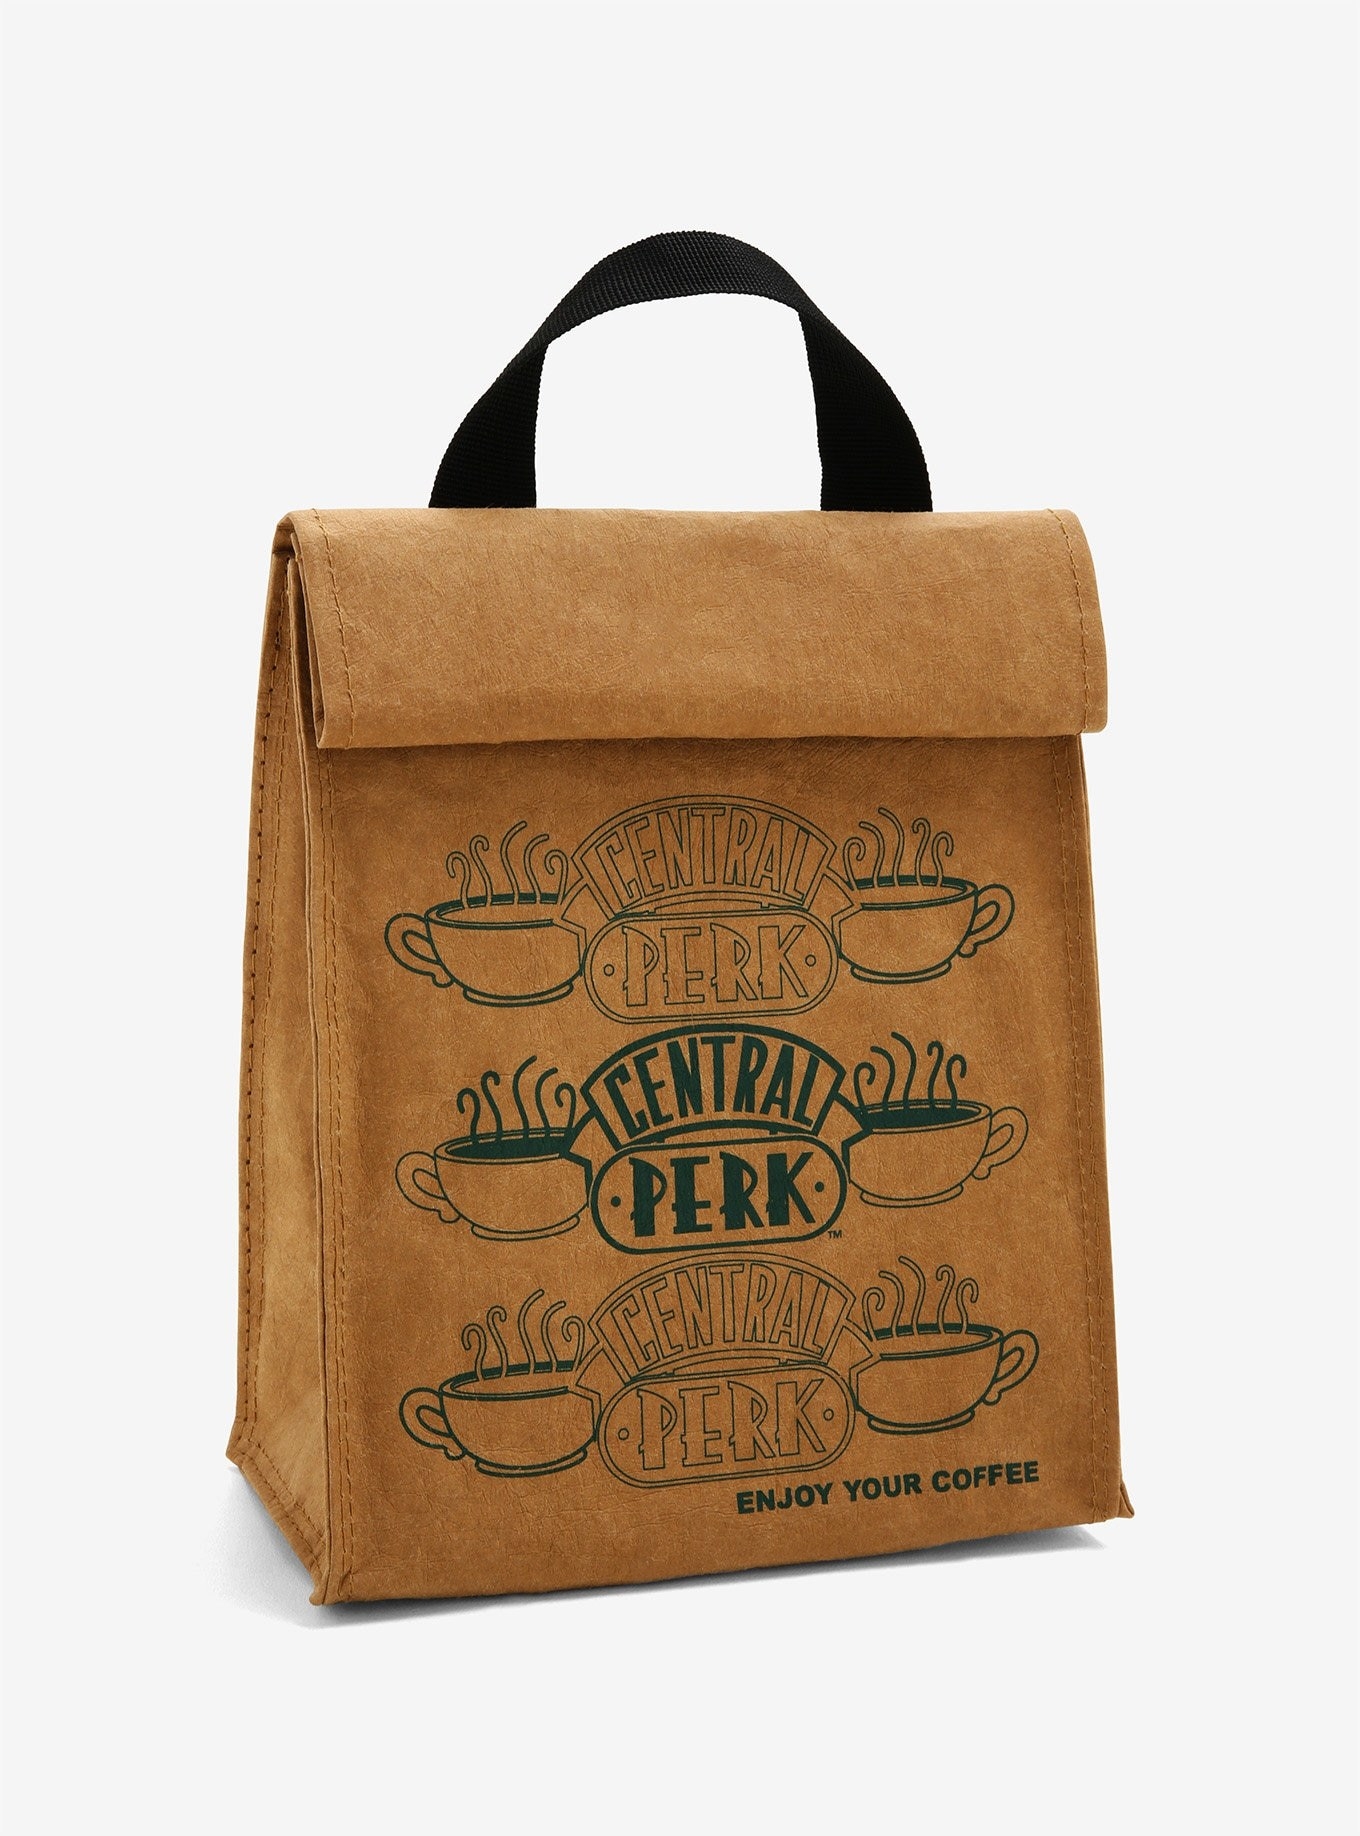 a lunch bag that looks like a brown bag with the central perk logo on it